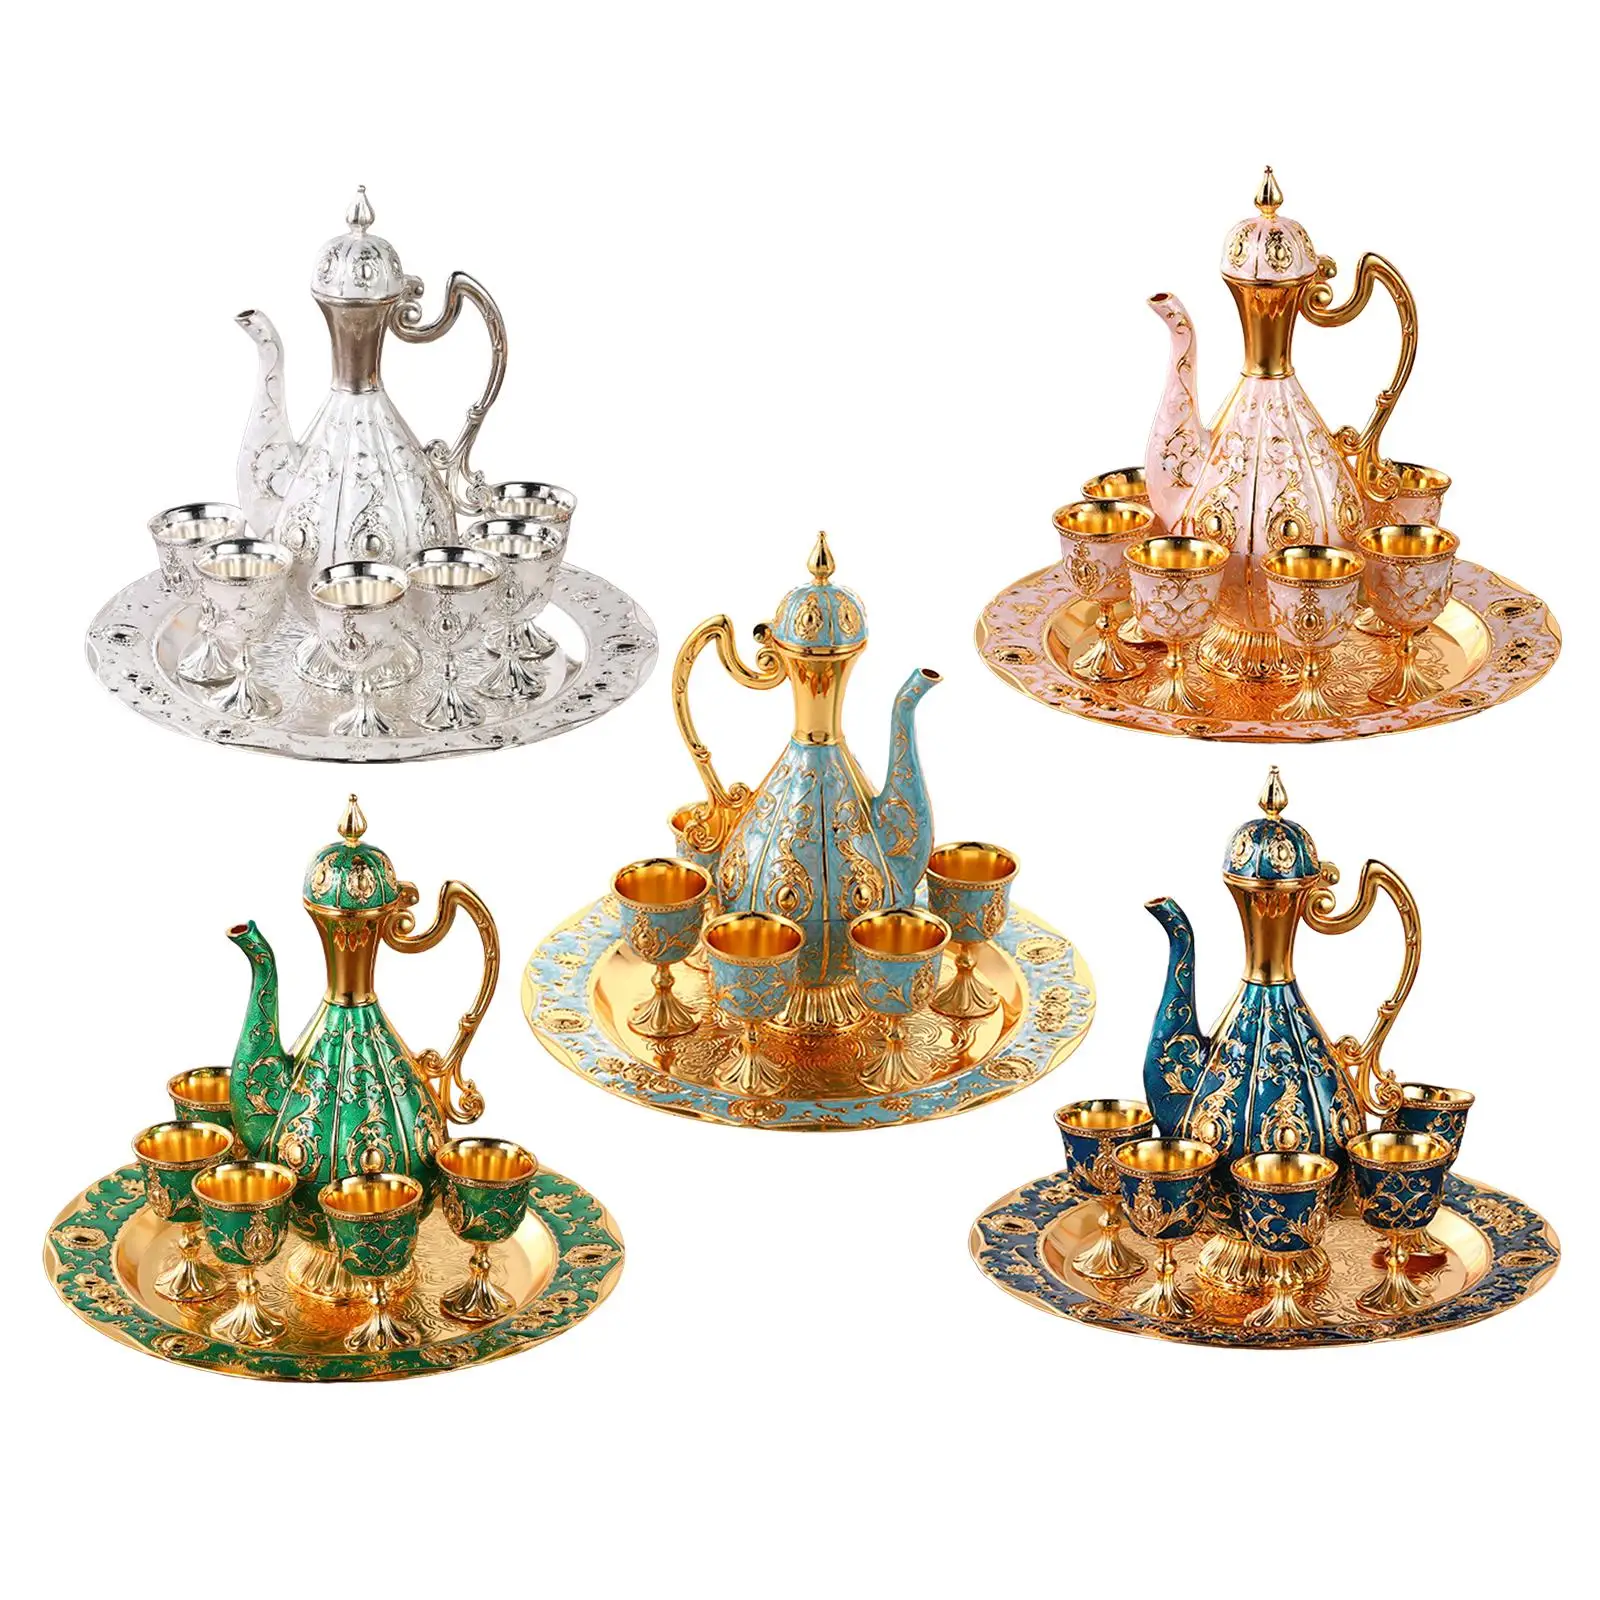 Luxury Turkish Coffee Pot Set Teapot Set with Tea Cup Drinkware Storage Tray for Table Dining Room Home Cabinet Decoration